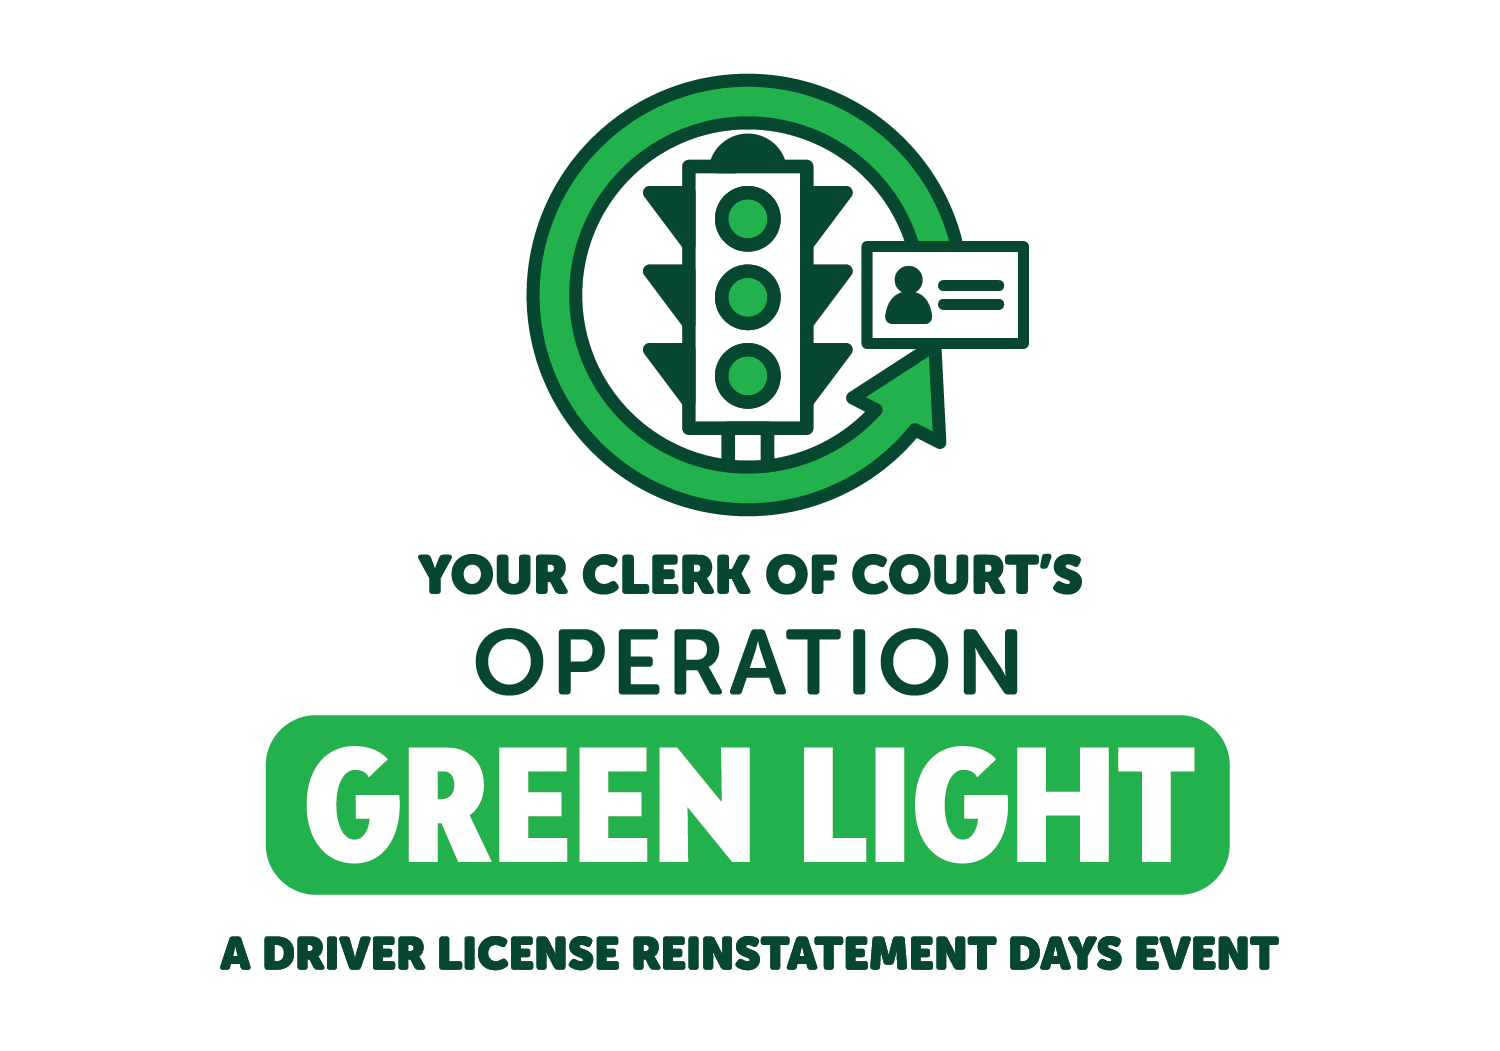 Charlotte County Clerk of Court Announces Next Annual Event to Help Customers Save on Fees to Reinstate Driver Licenses